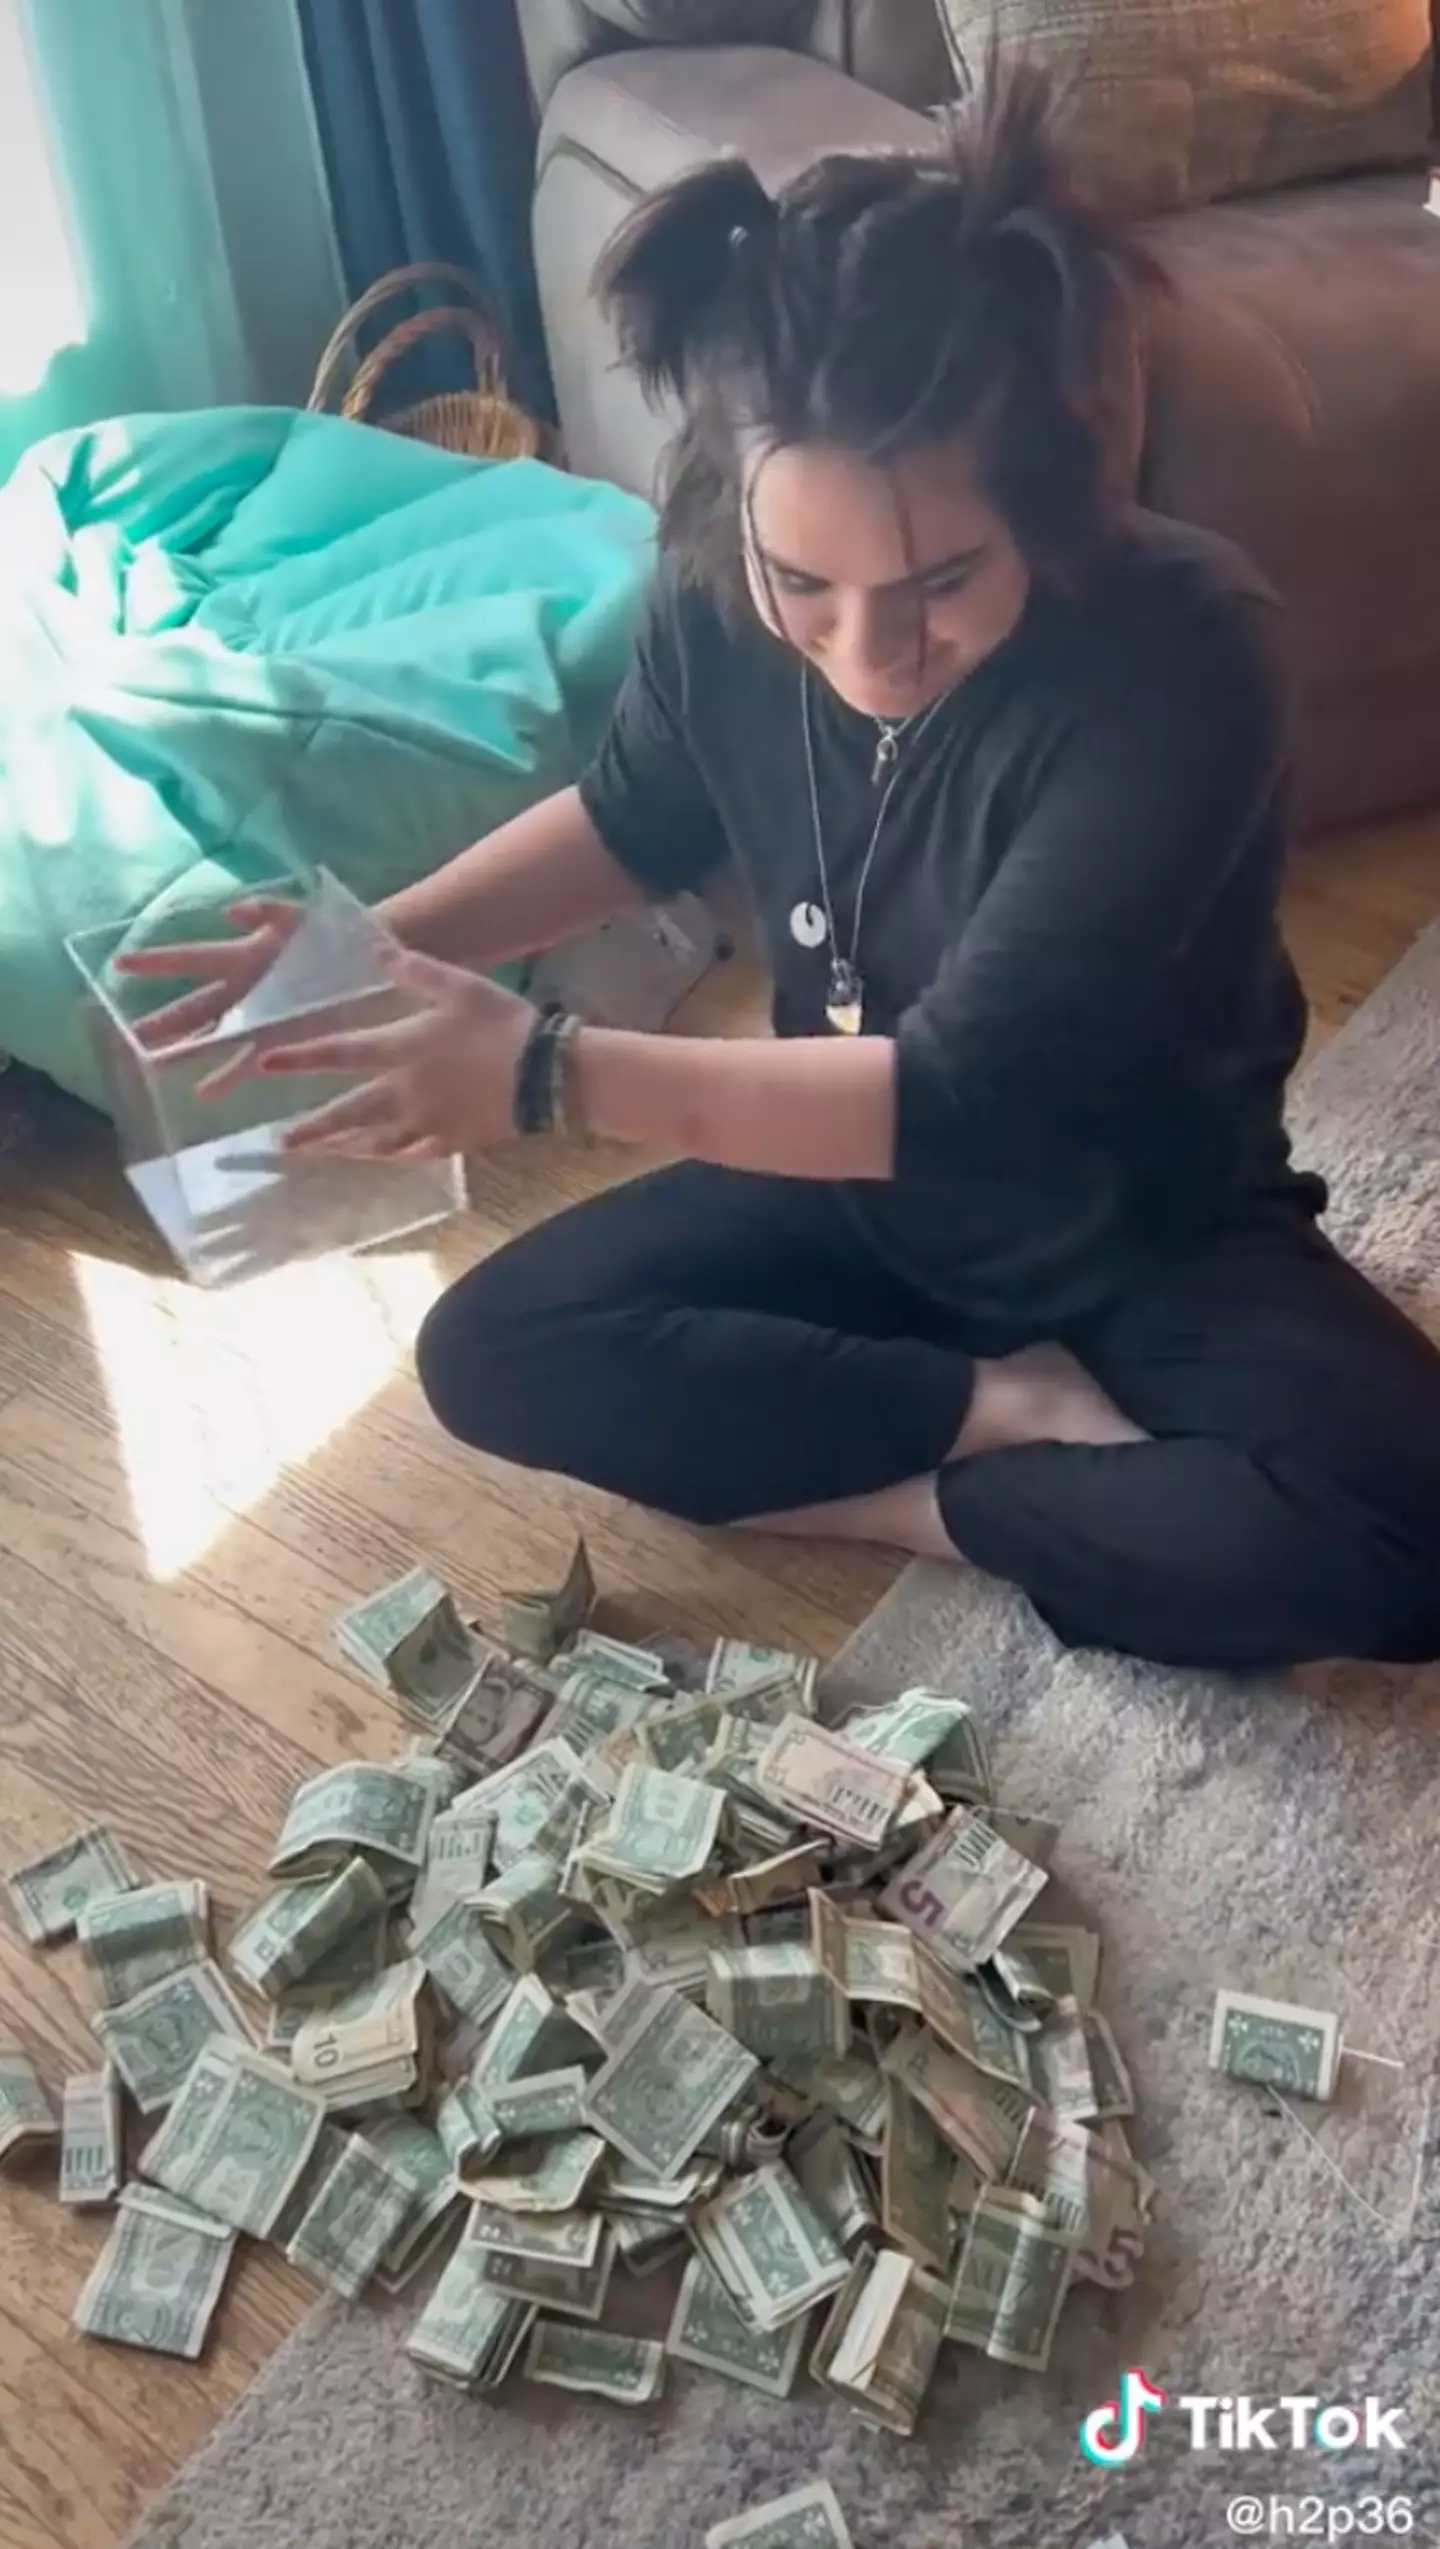 Atlas counting her tips in a viral video.